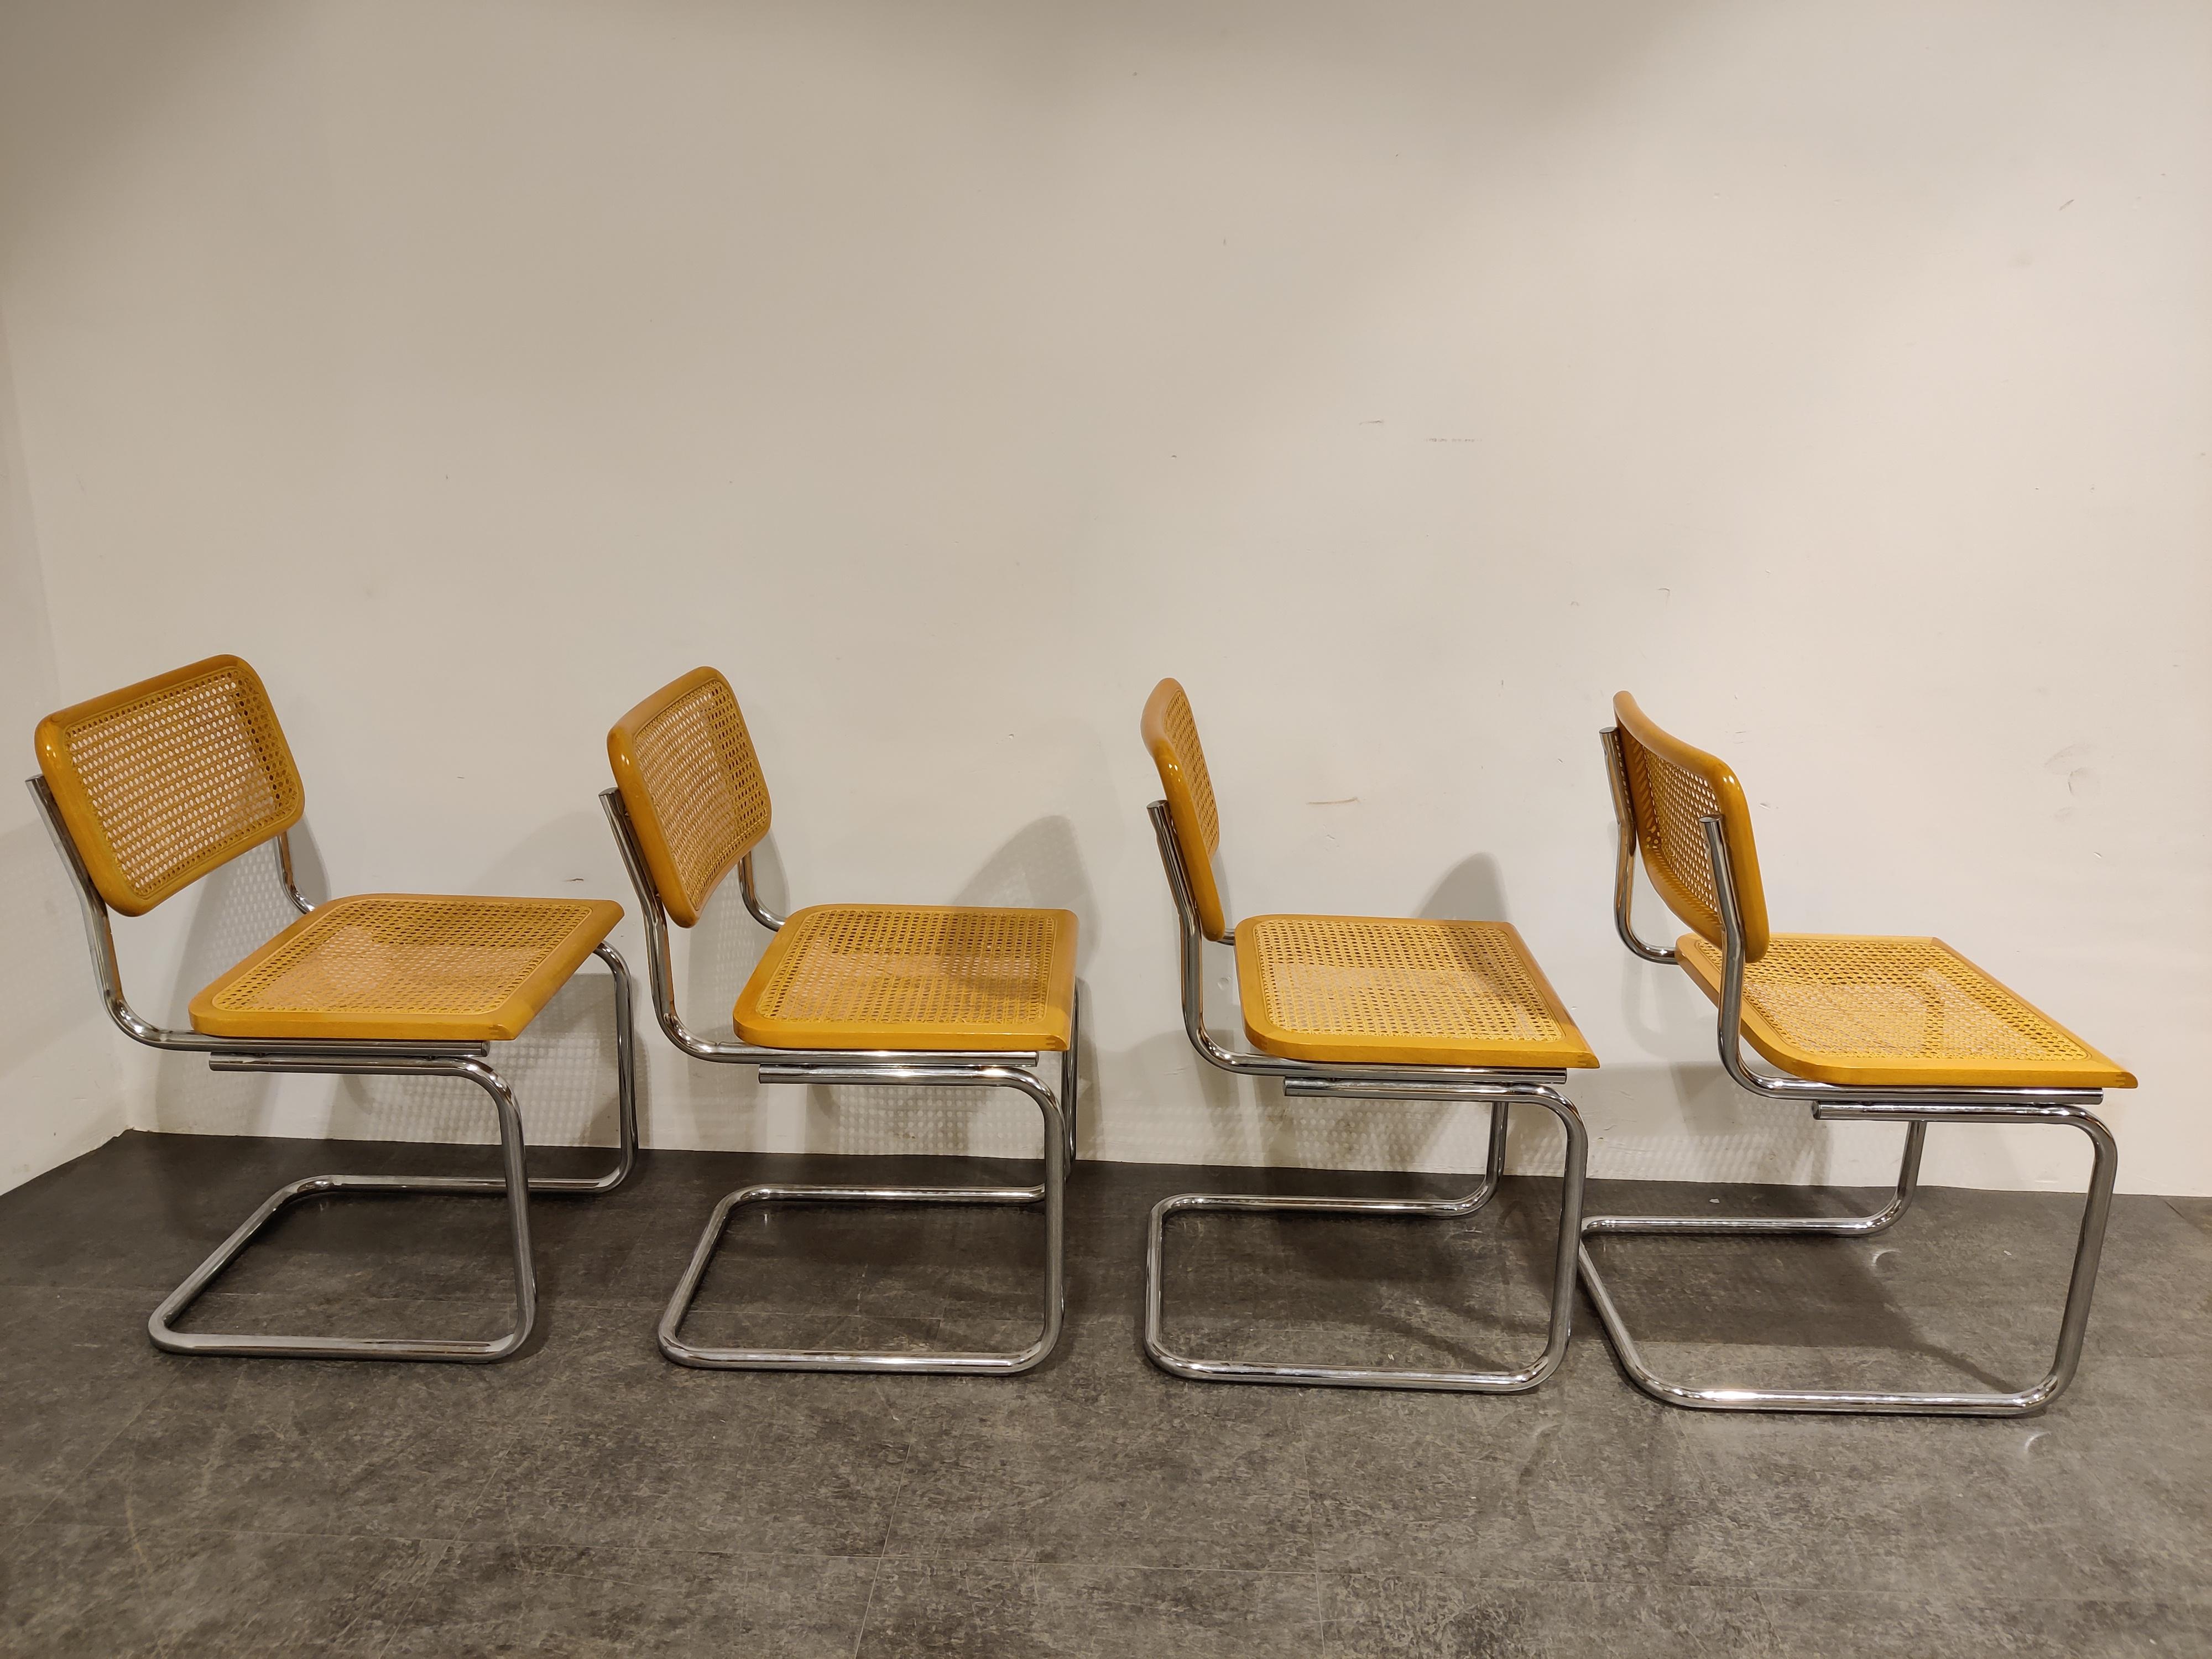 Late 20th Century Set of 4 Vintage Marcel Breuer Style Cesca Chairs, Made in Italy, 1970s